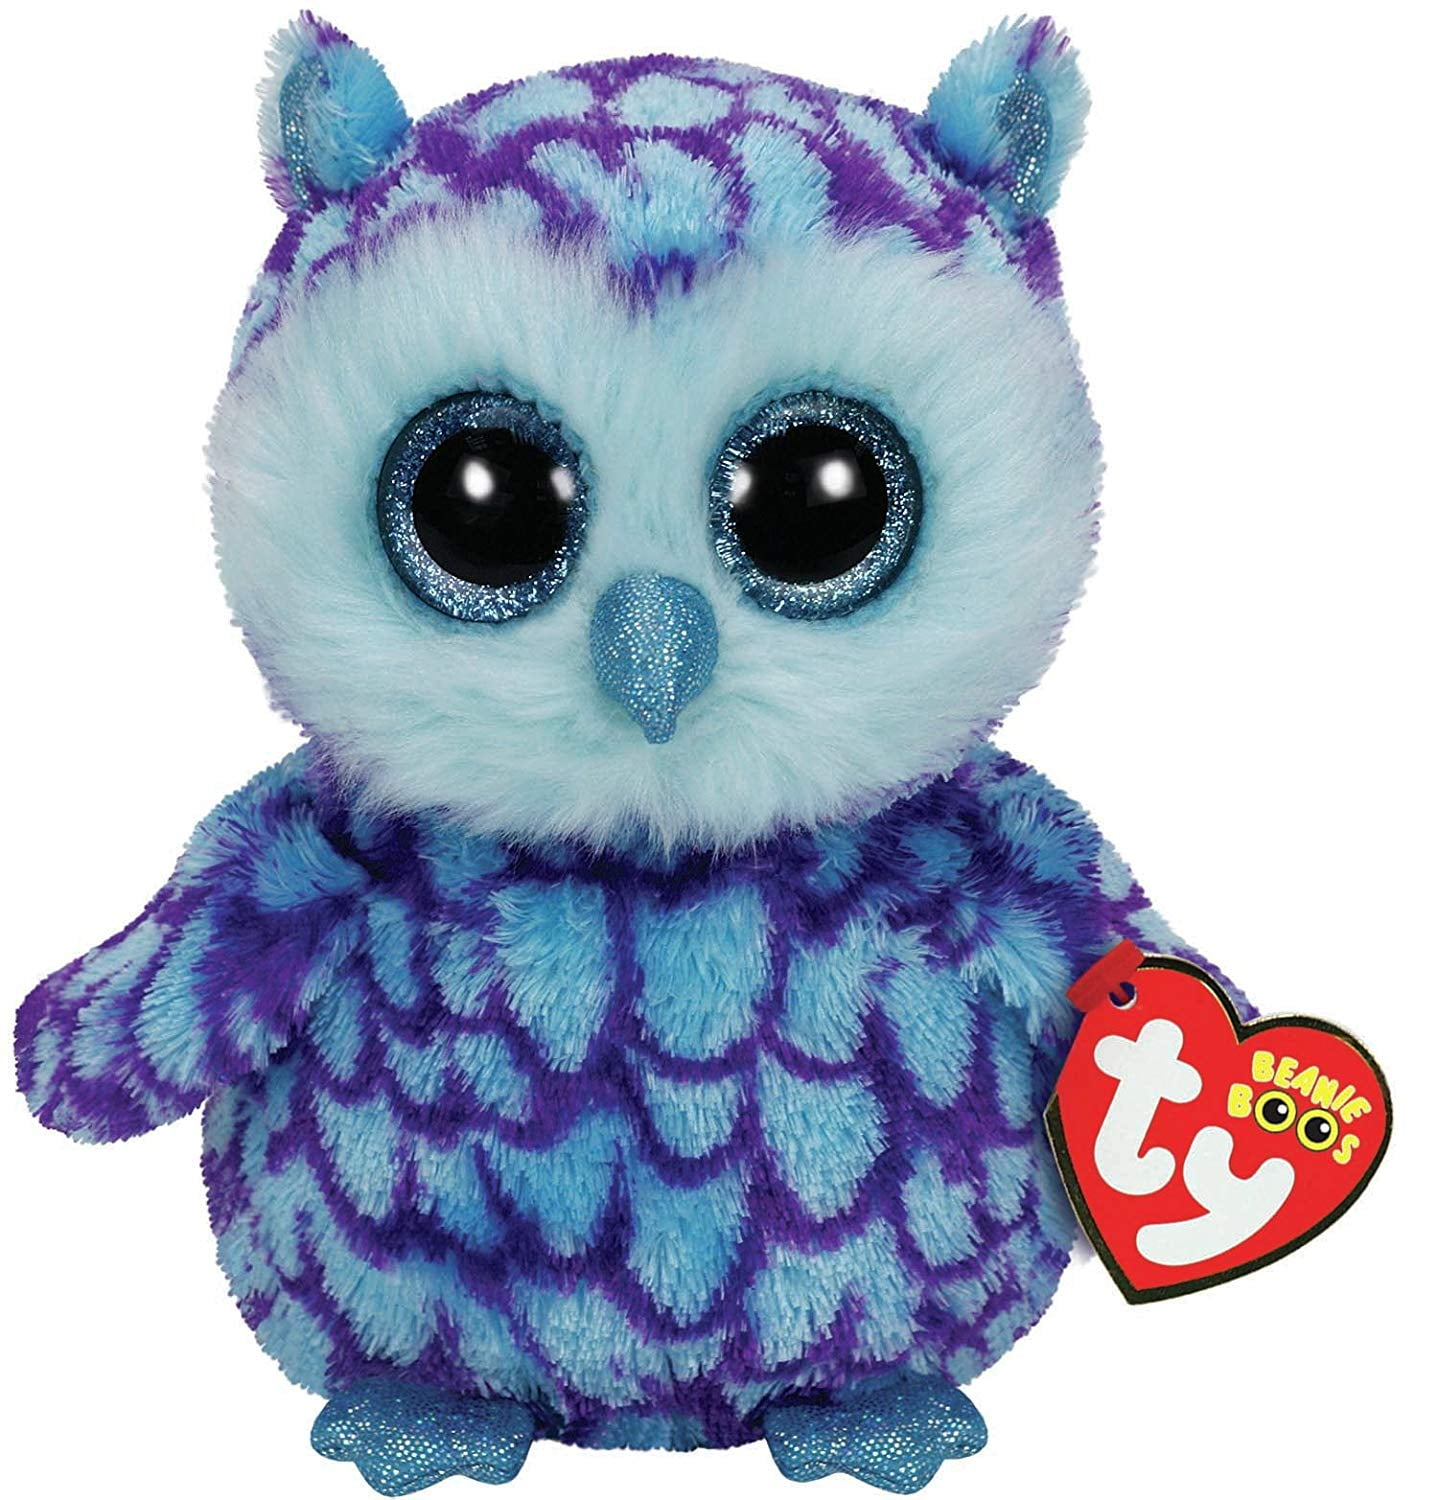 Ty Beanie Boos 6" Sparkle The Special Owl Plush Stuffed Toy New 